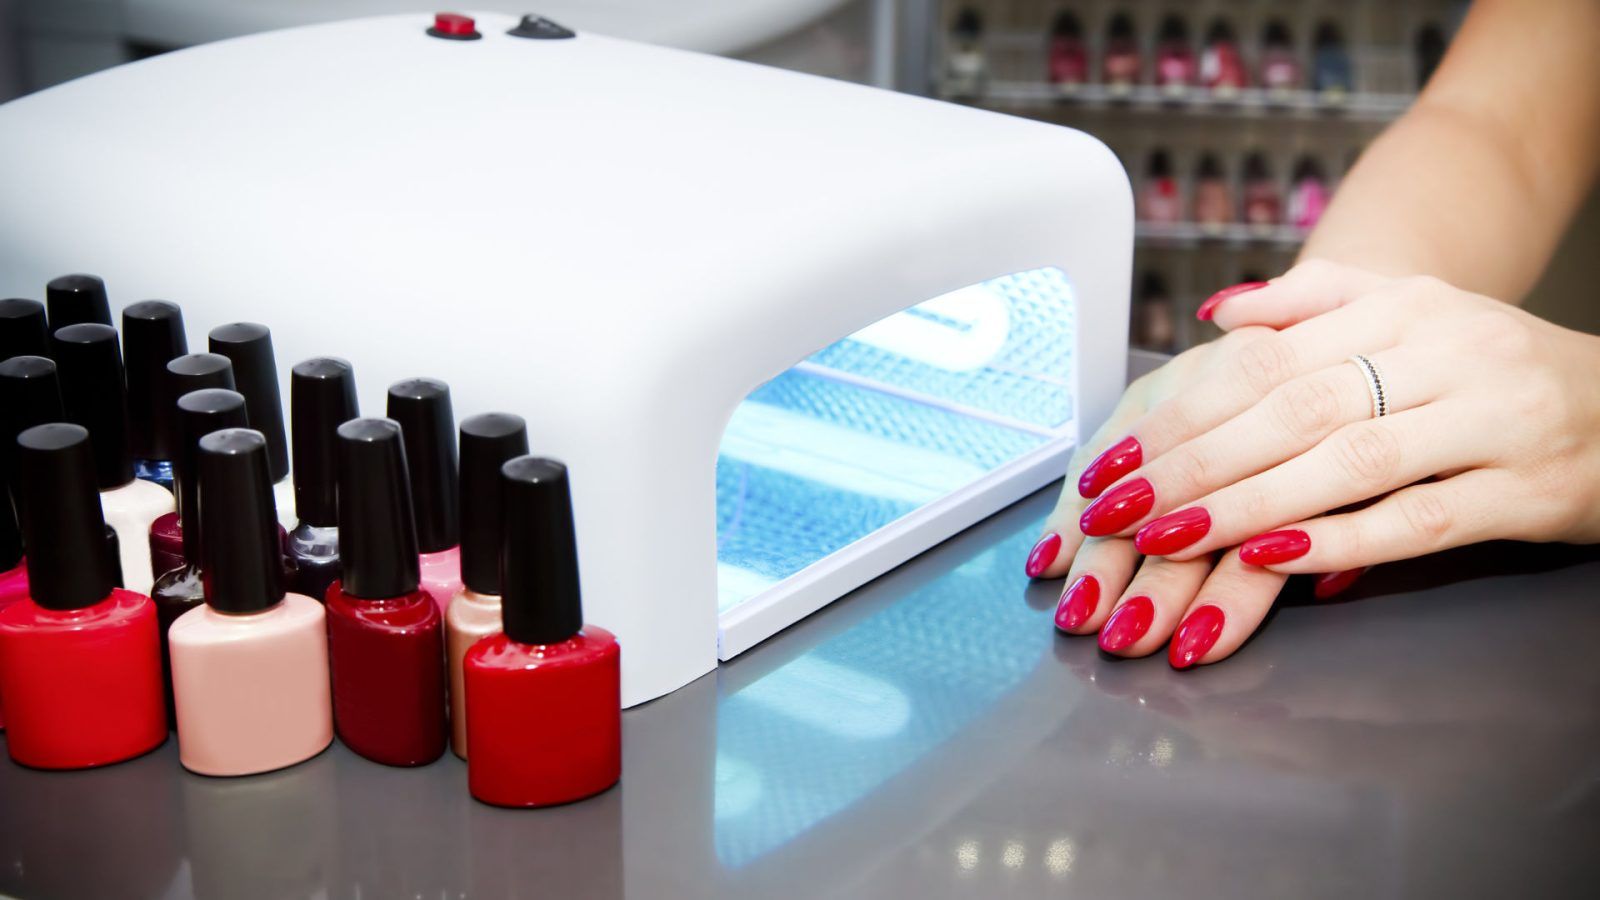 Are Gel Nails Bad for You? | Houston Methodist On Health